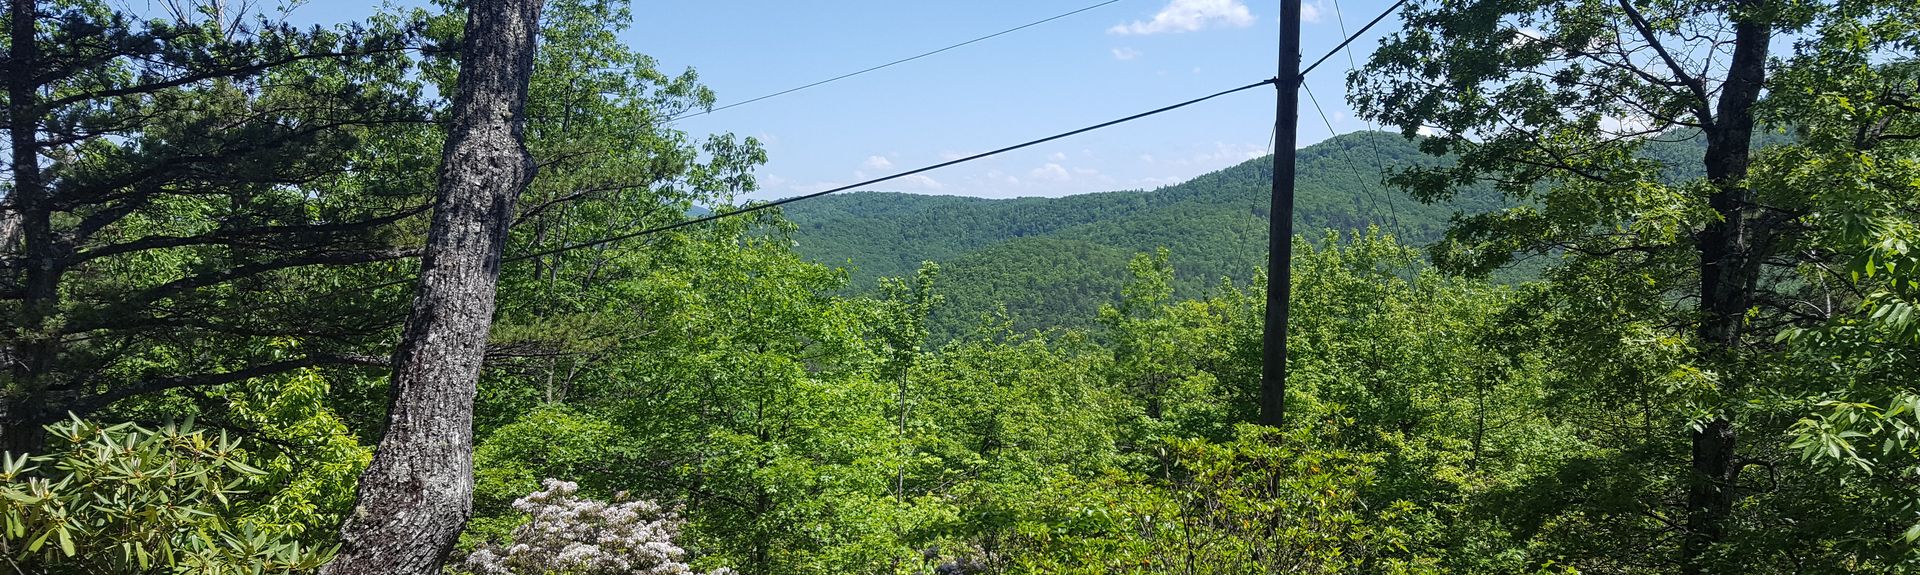 Vrbo® Buncombe County US Vacation Rentals: Reviews Booking